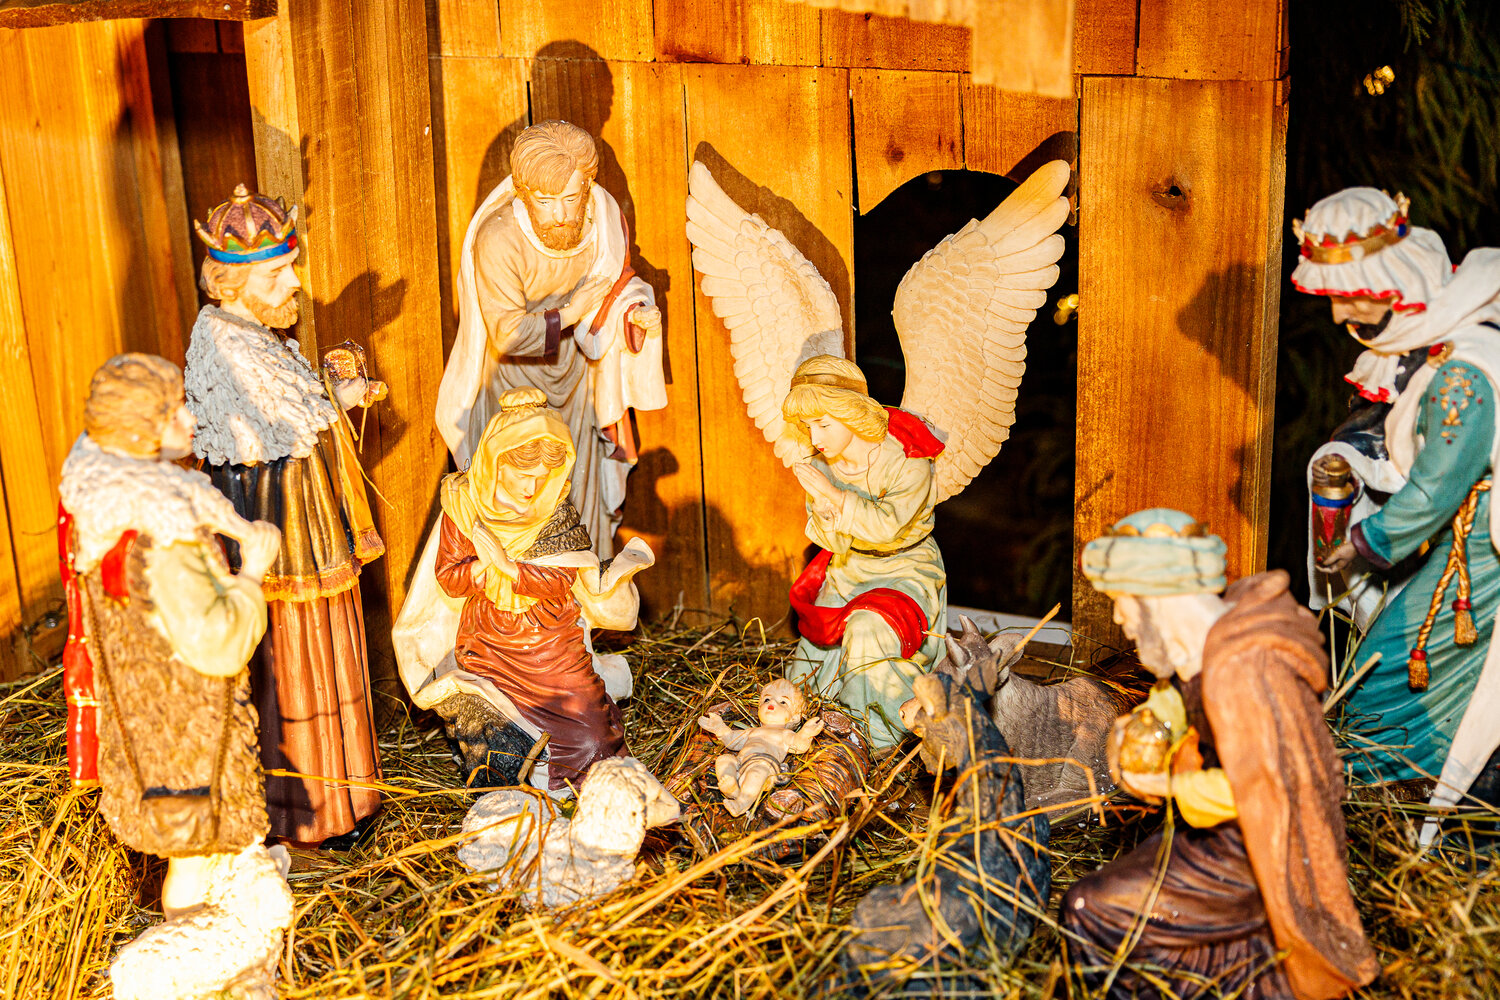 The Nativity scene lit up during Lynbrook village’s Blessing of the Créche. The Nativity scene represents the birth of Jesus as represented in the Bible.